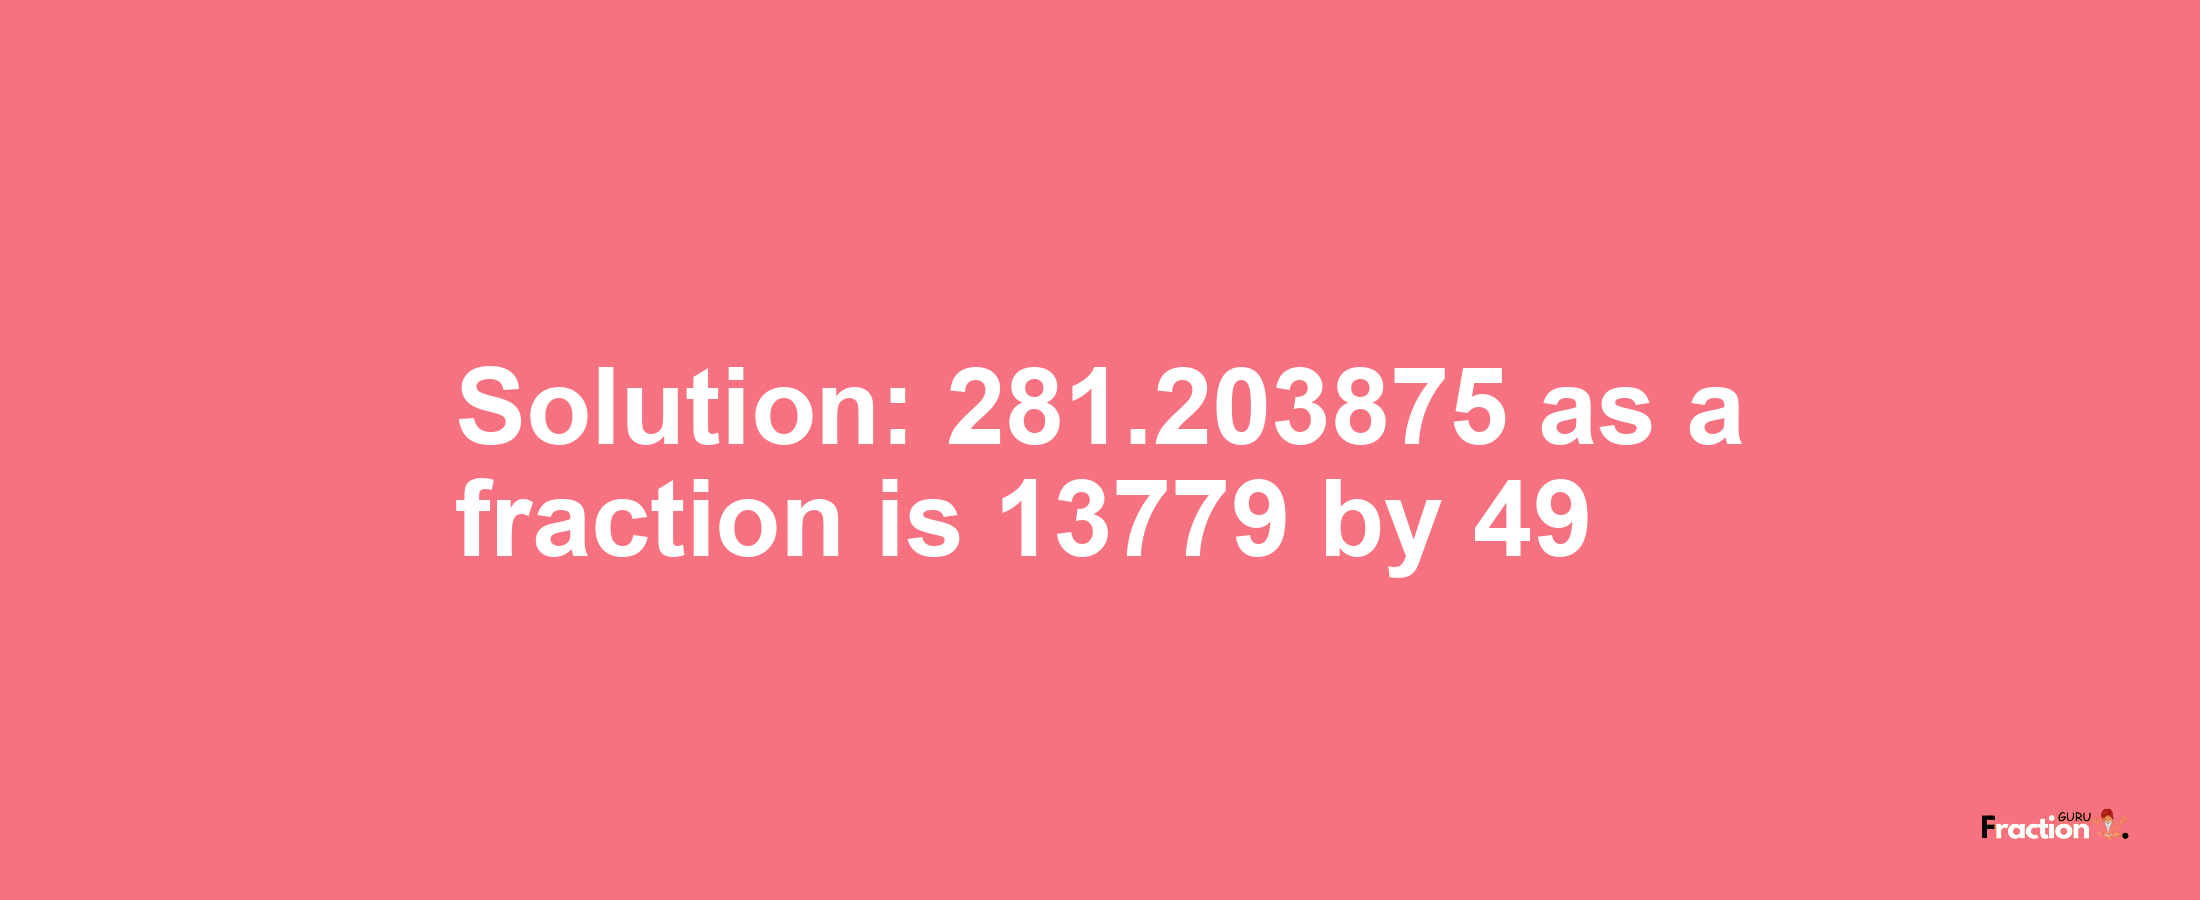 Solution:281.203875 as a fraction is 13779/49